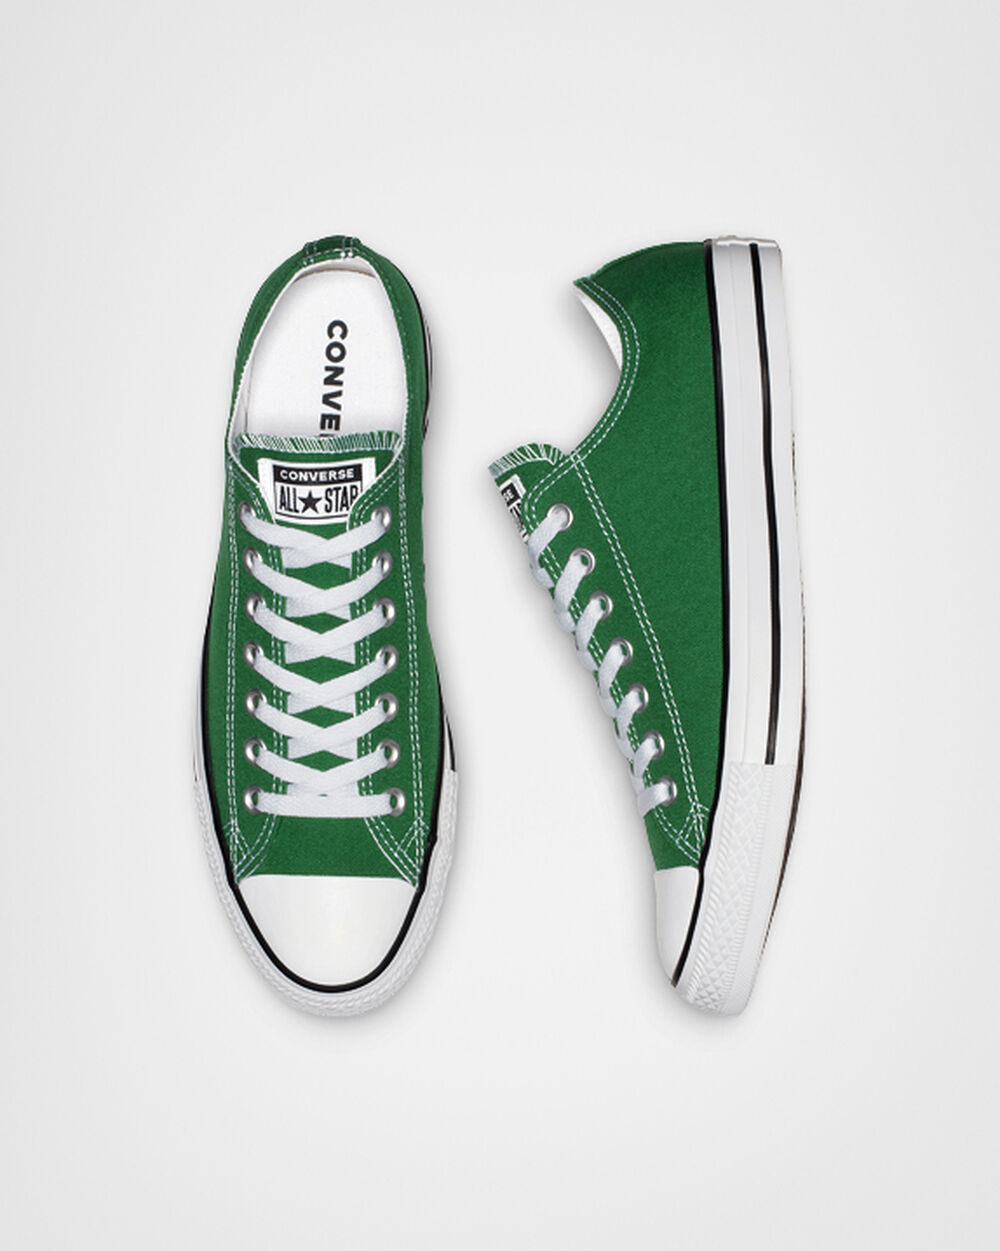 Tenis Converse Chuck Taylor All Star Mujer Verdes | Mexico-680156